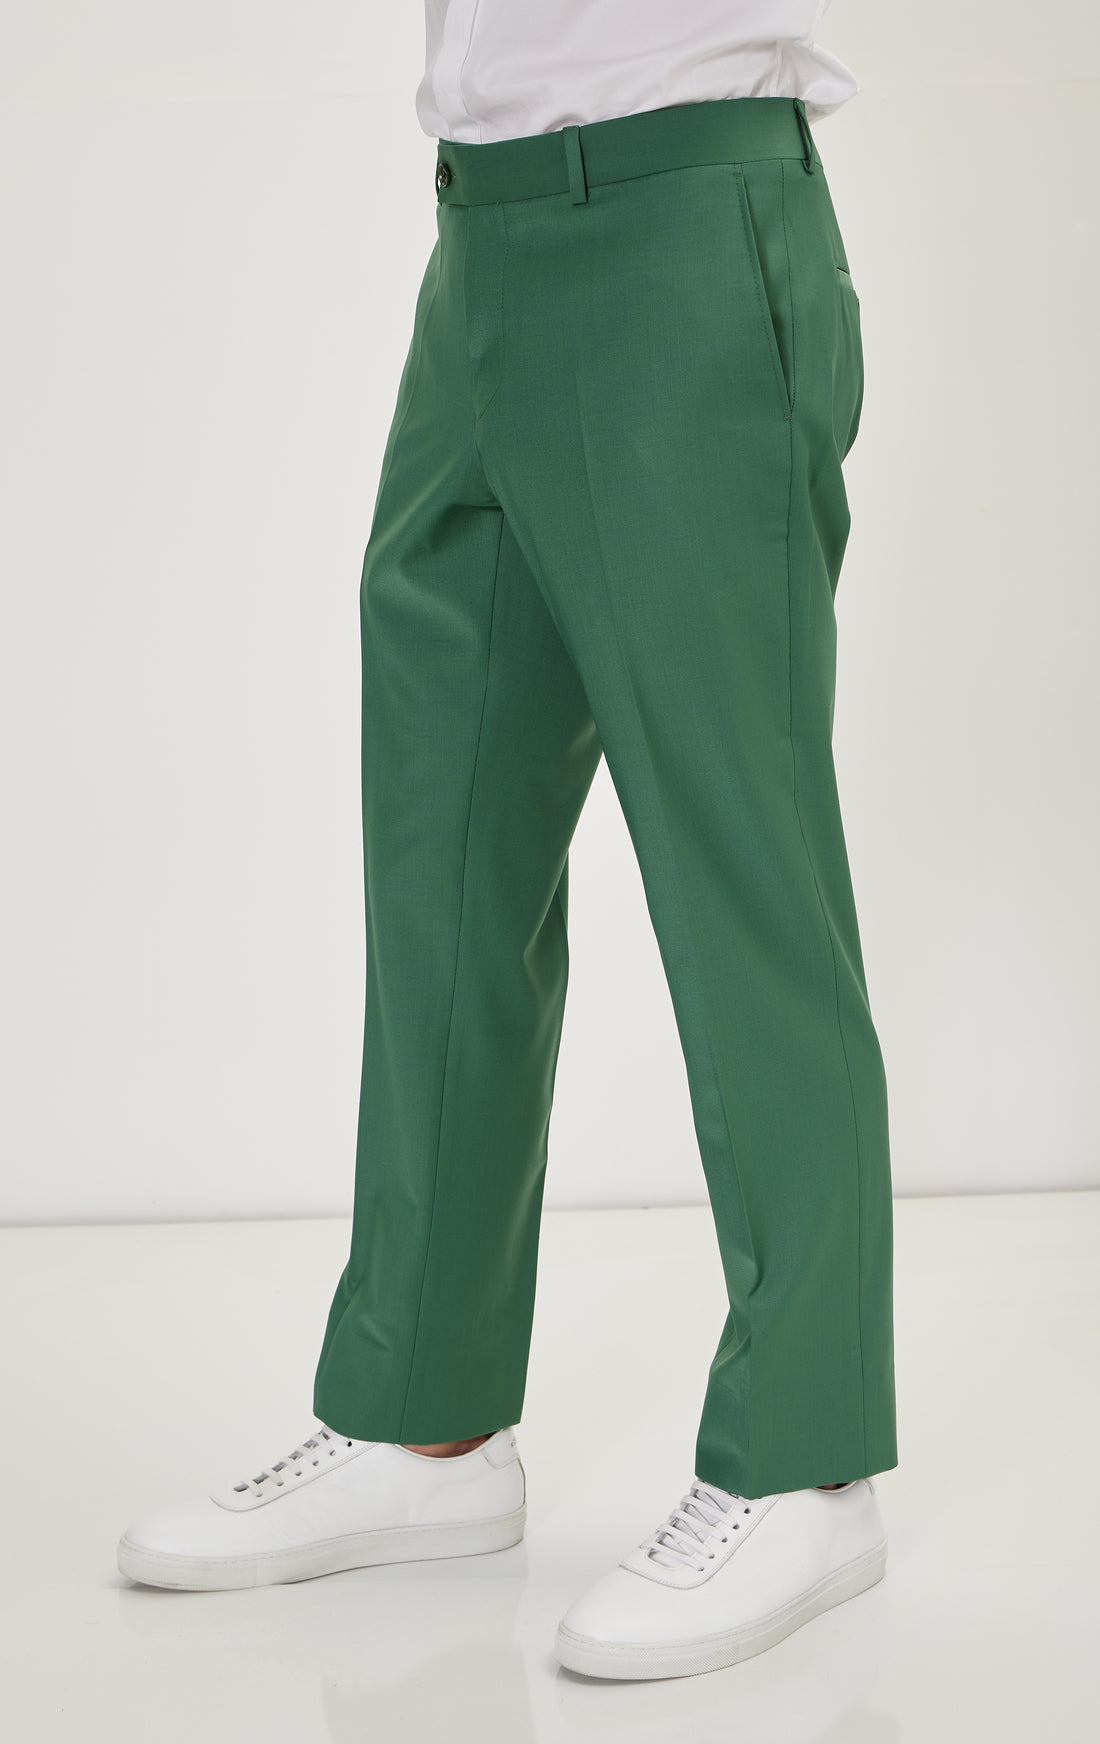 N° R206 SUPER 120S MERINO WOOL DOUBLE BREASTED SUIT - VERDANT GREEN